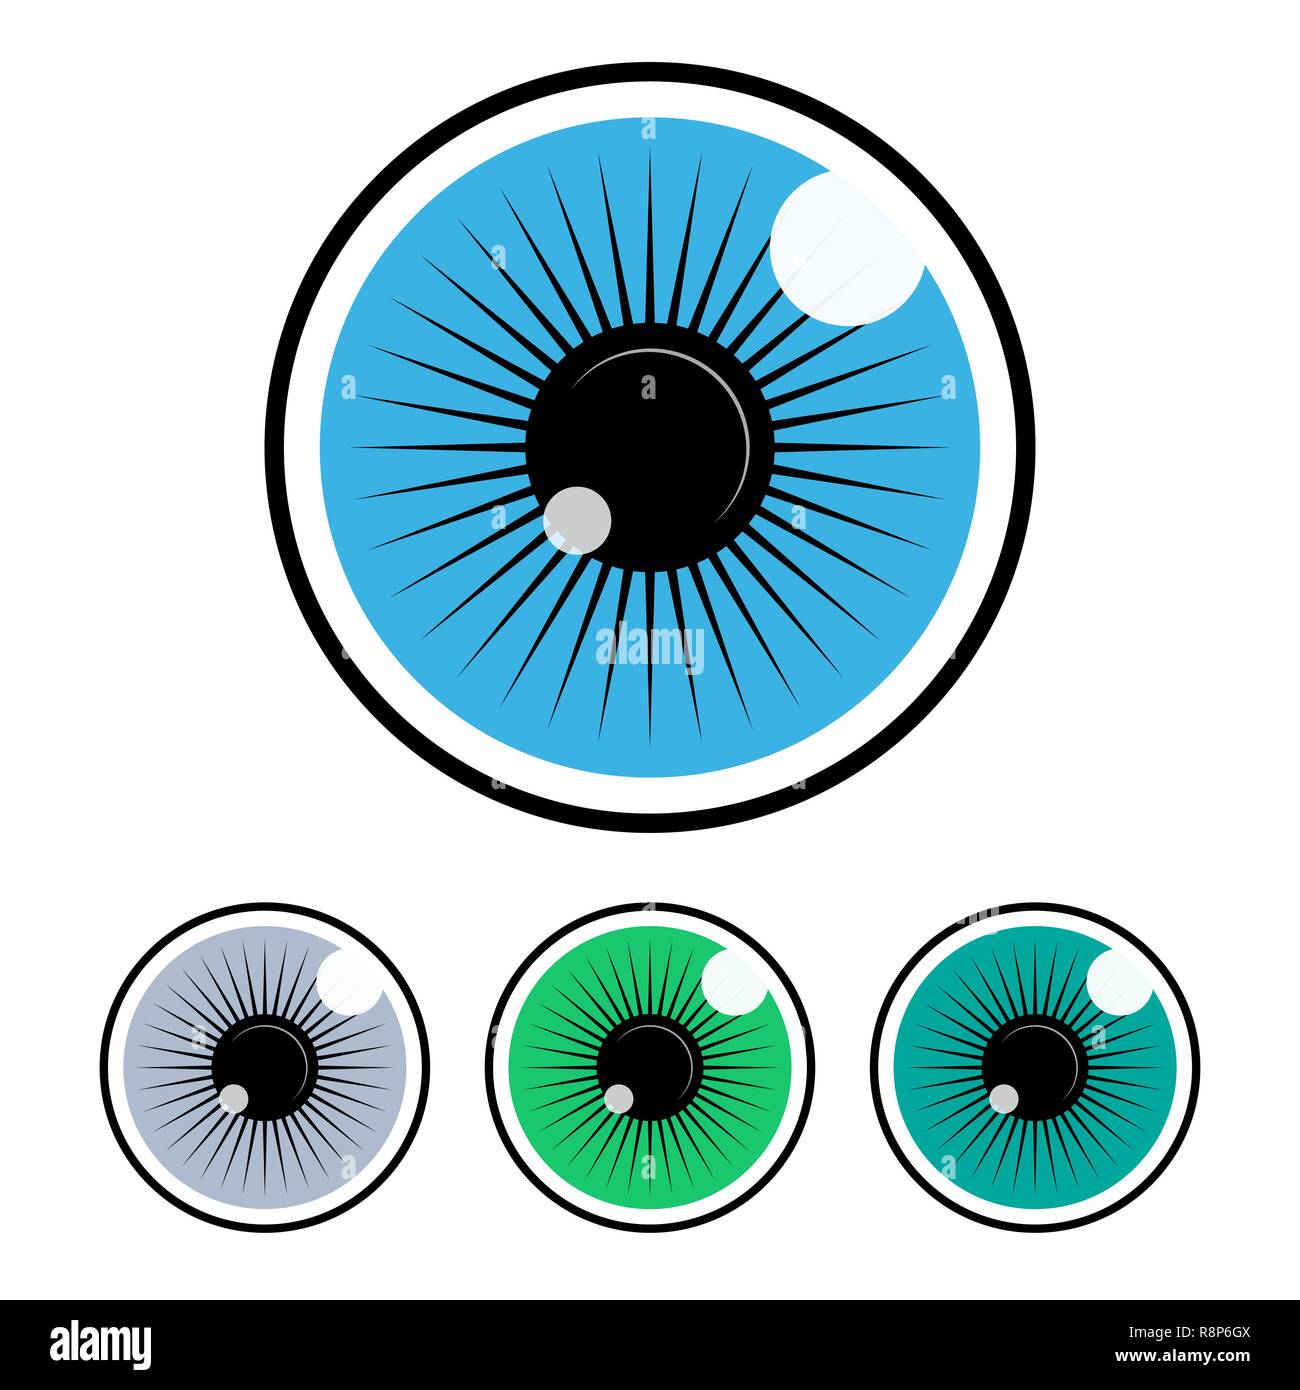 Set of Eye icons in flat design. Vector illustration. Collection of colored eyeball Stock Vector